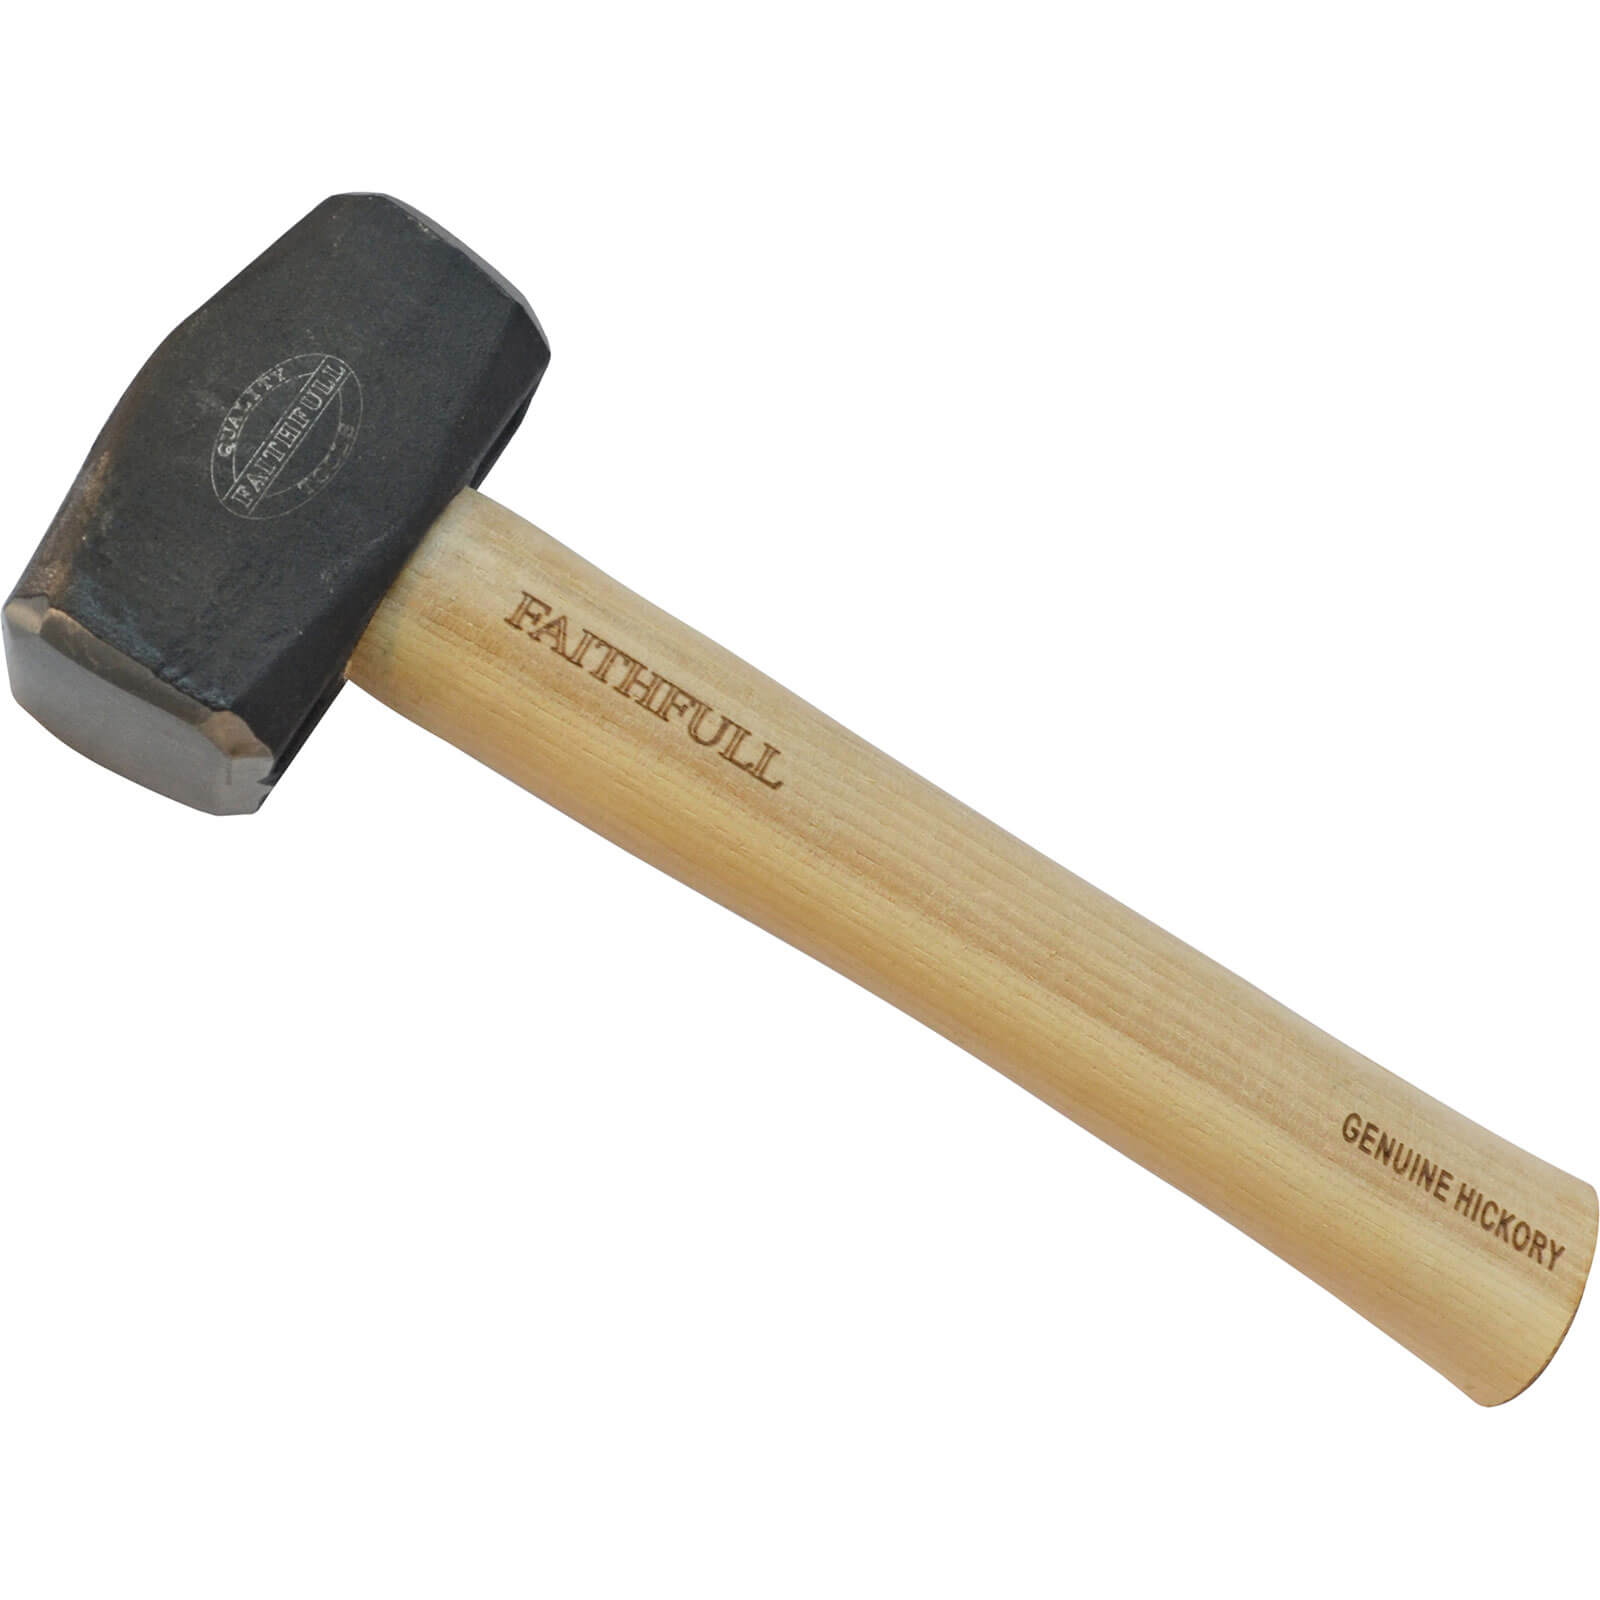 Image of Faithfull Contractors Club Hammer 1.1kg